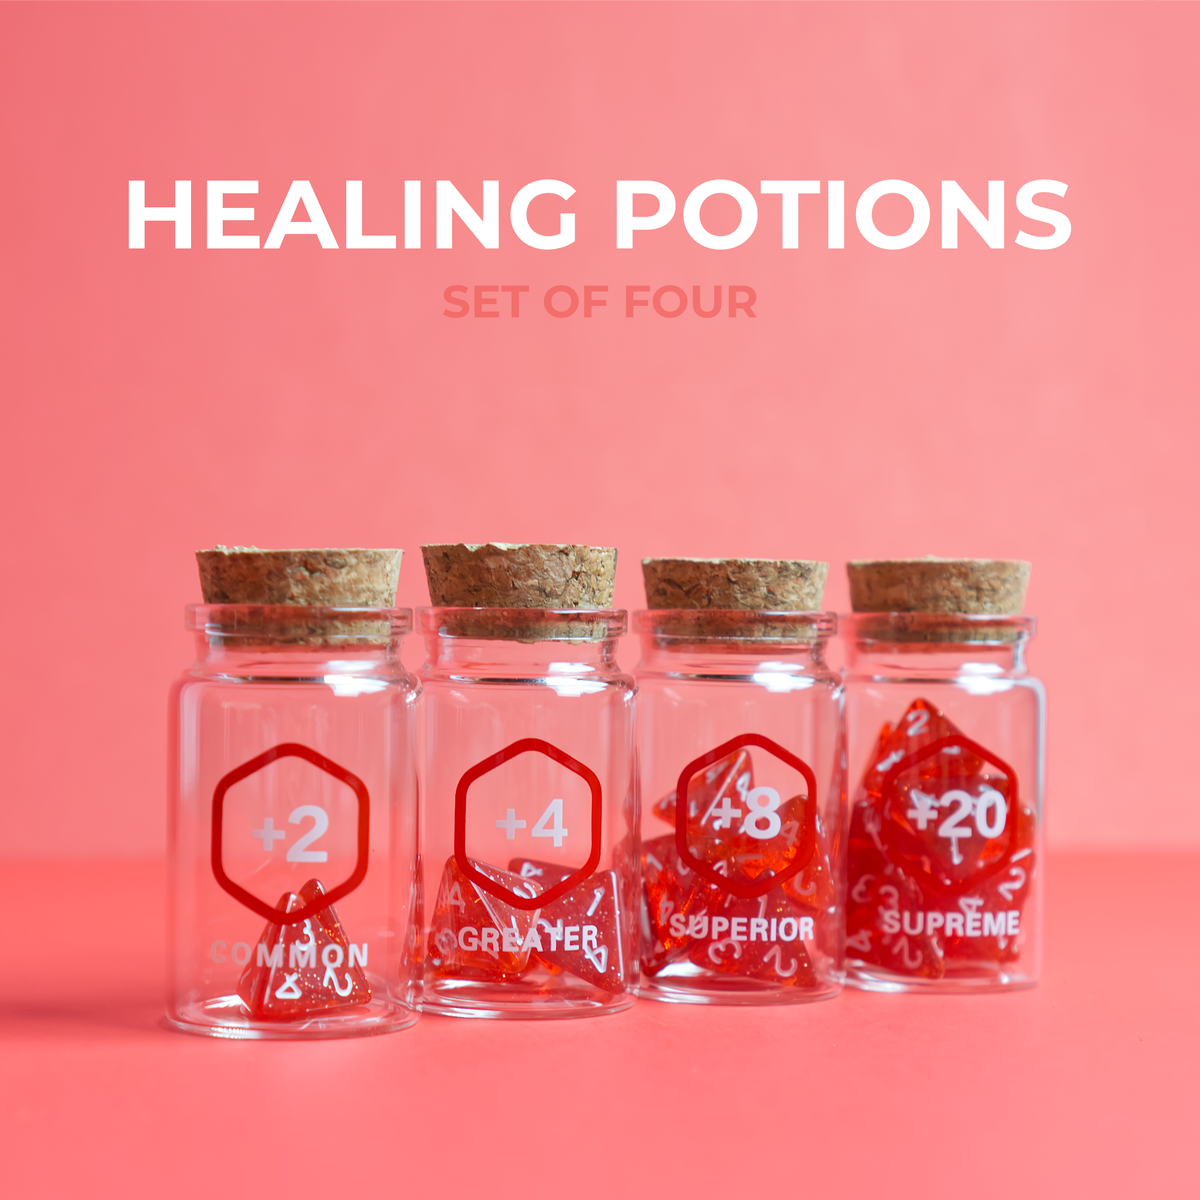 Healing Potion + 20 D4 DND Polyhedral Dice